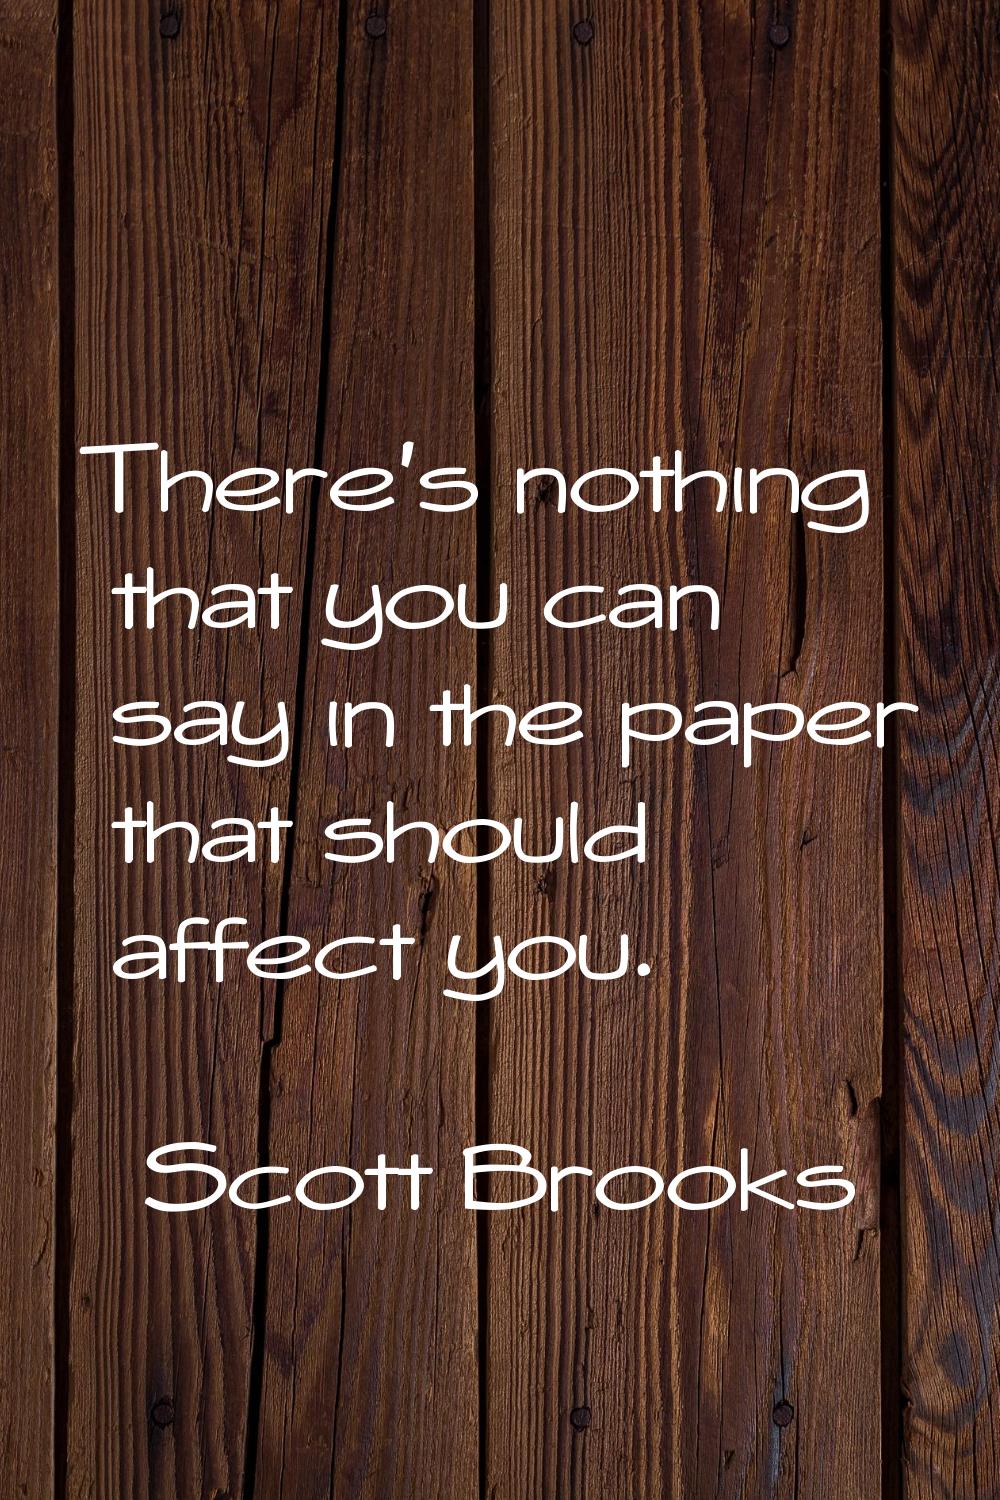 There's nothing that you can say in the paper that should affect you.